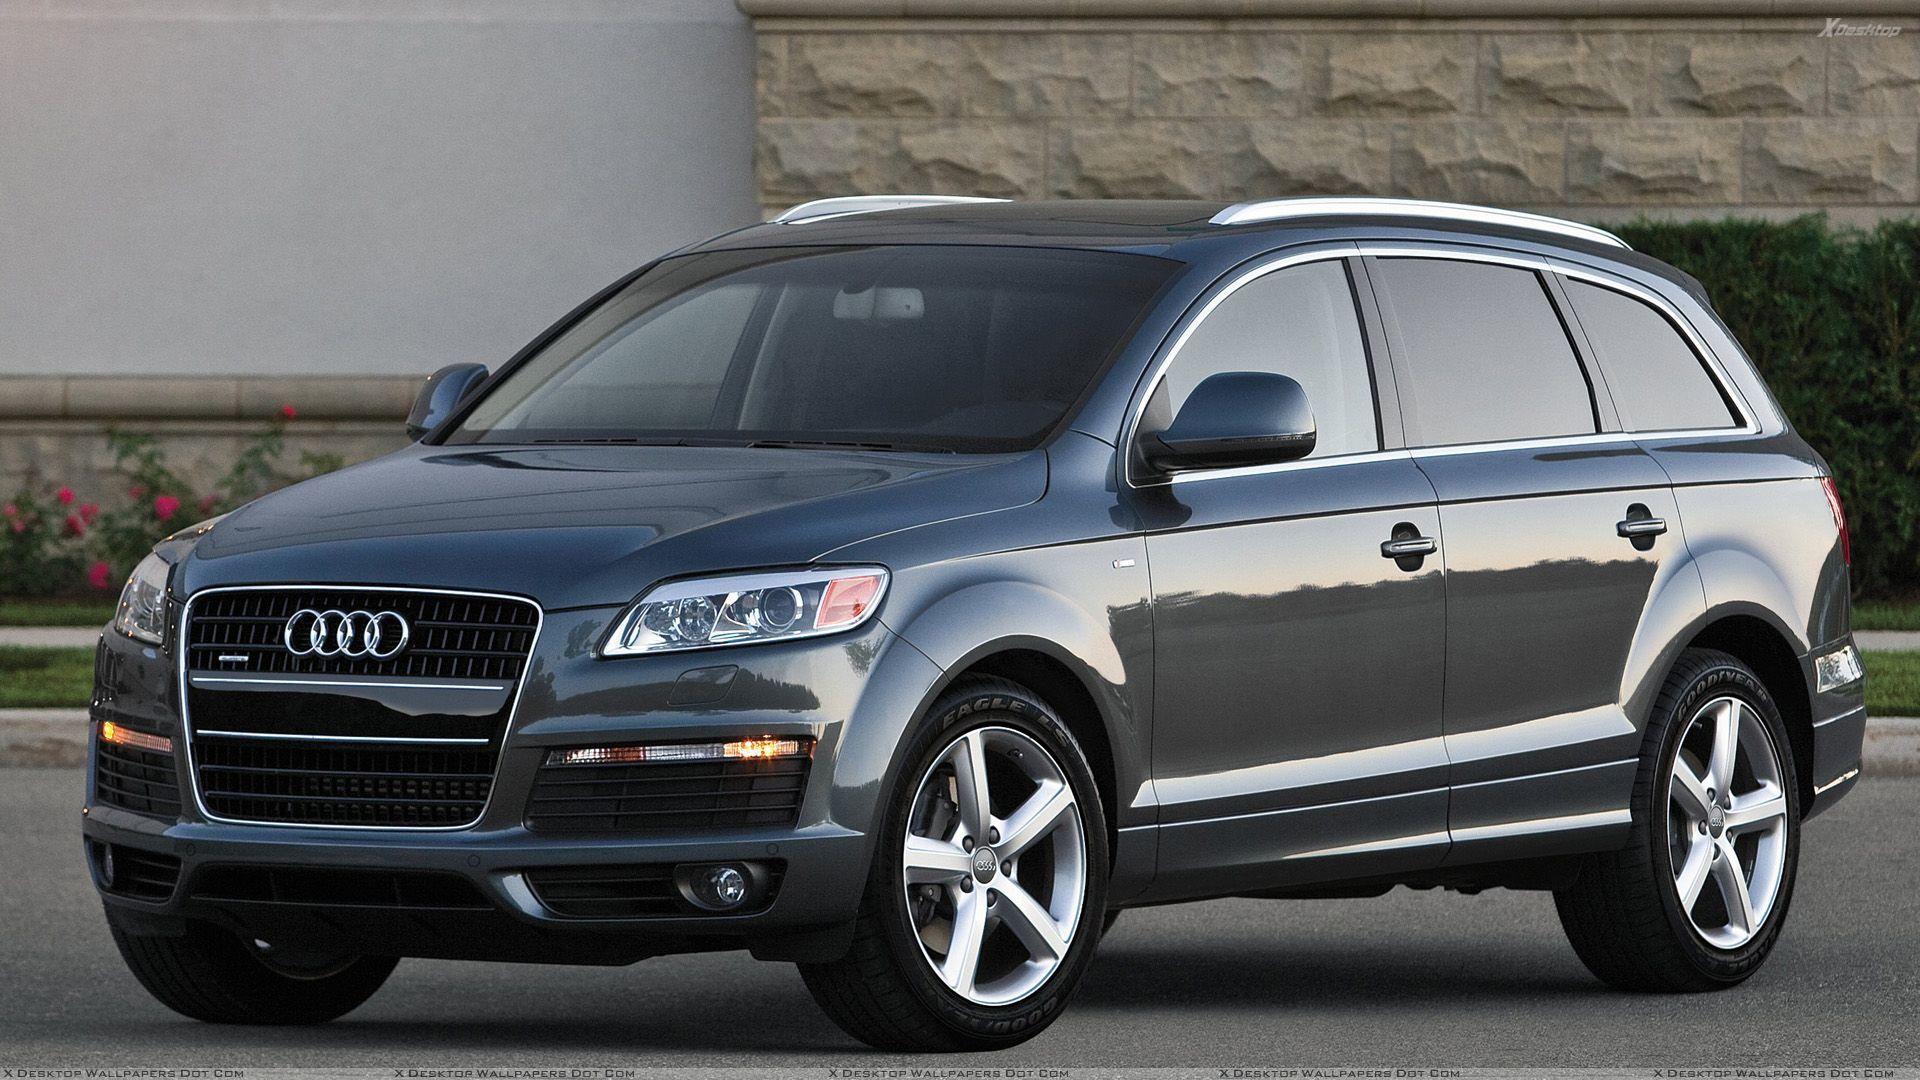 Audi Q7 In Grey Front Side Pose Wallpaper